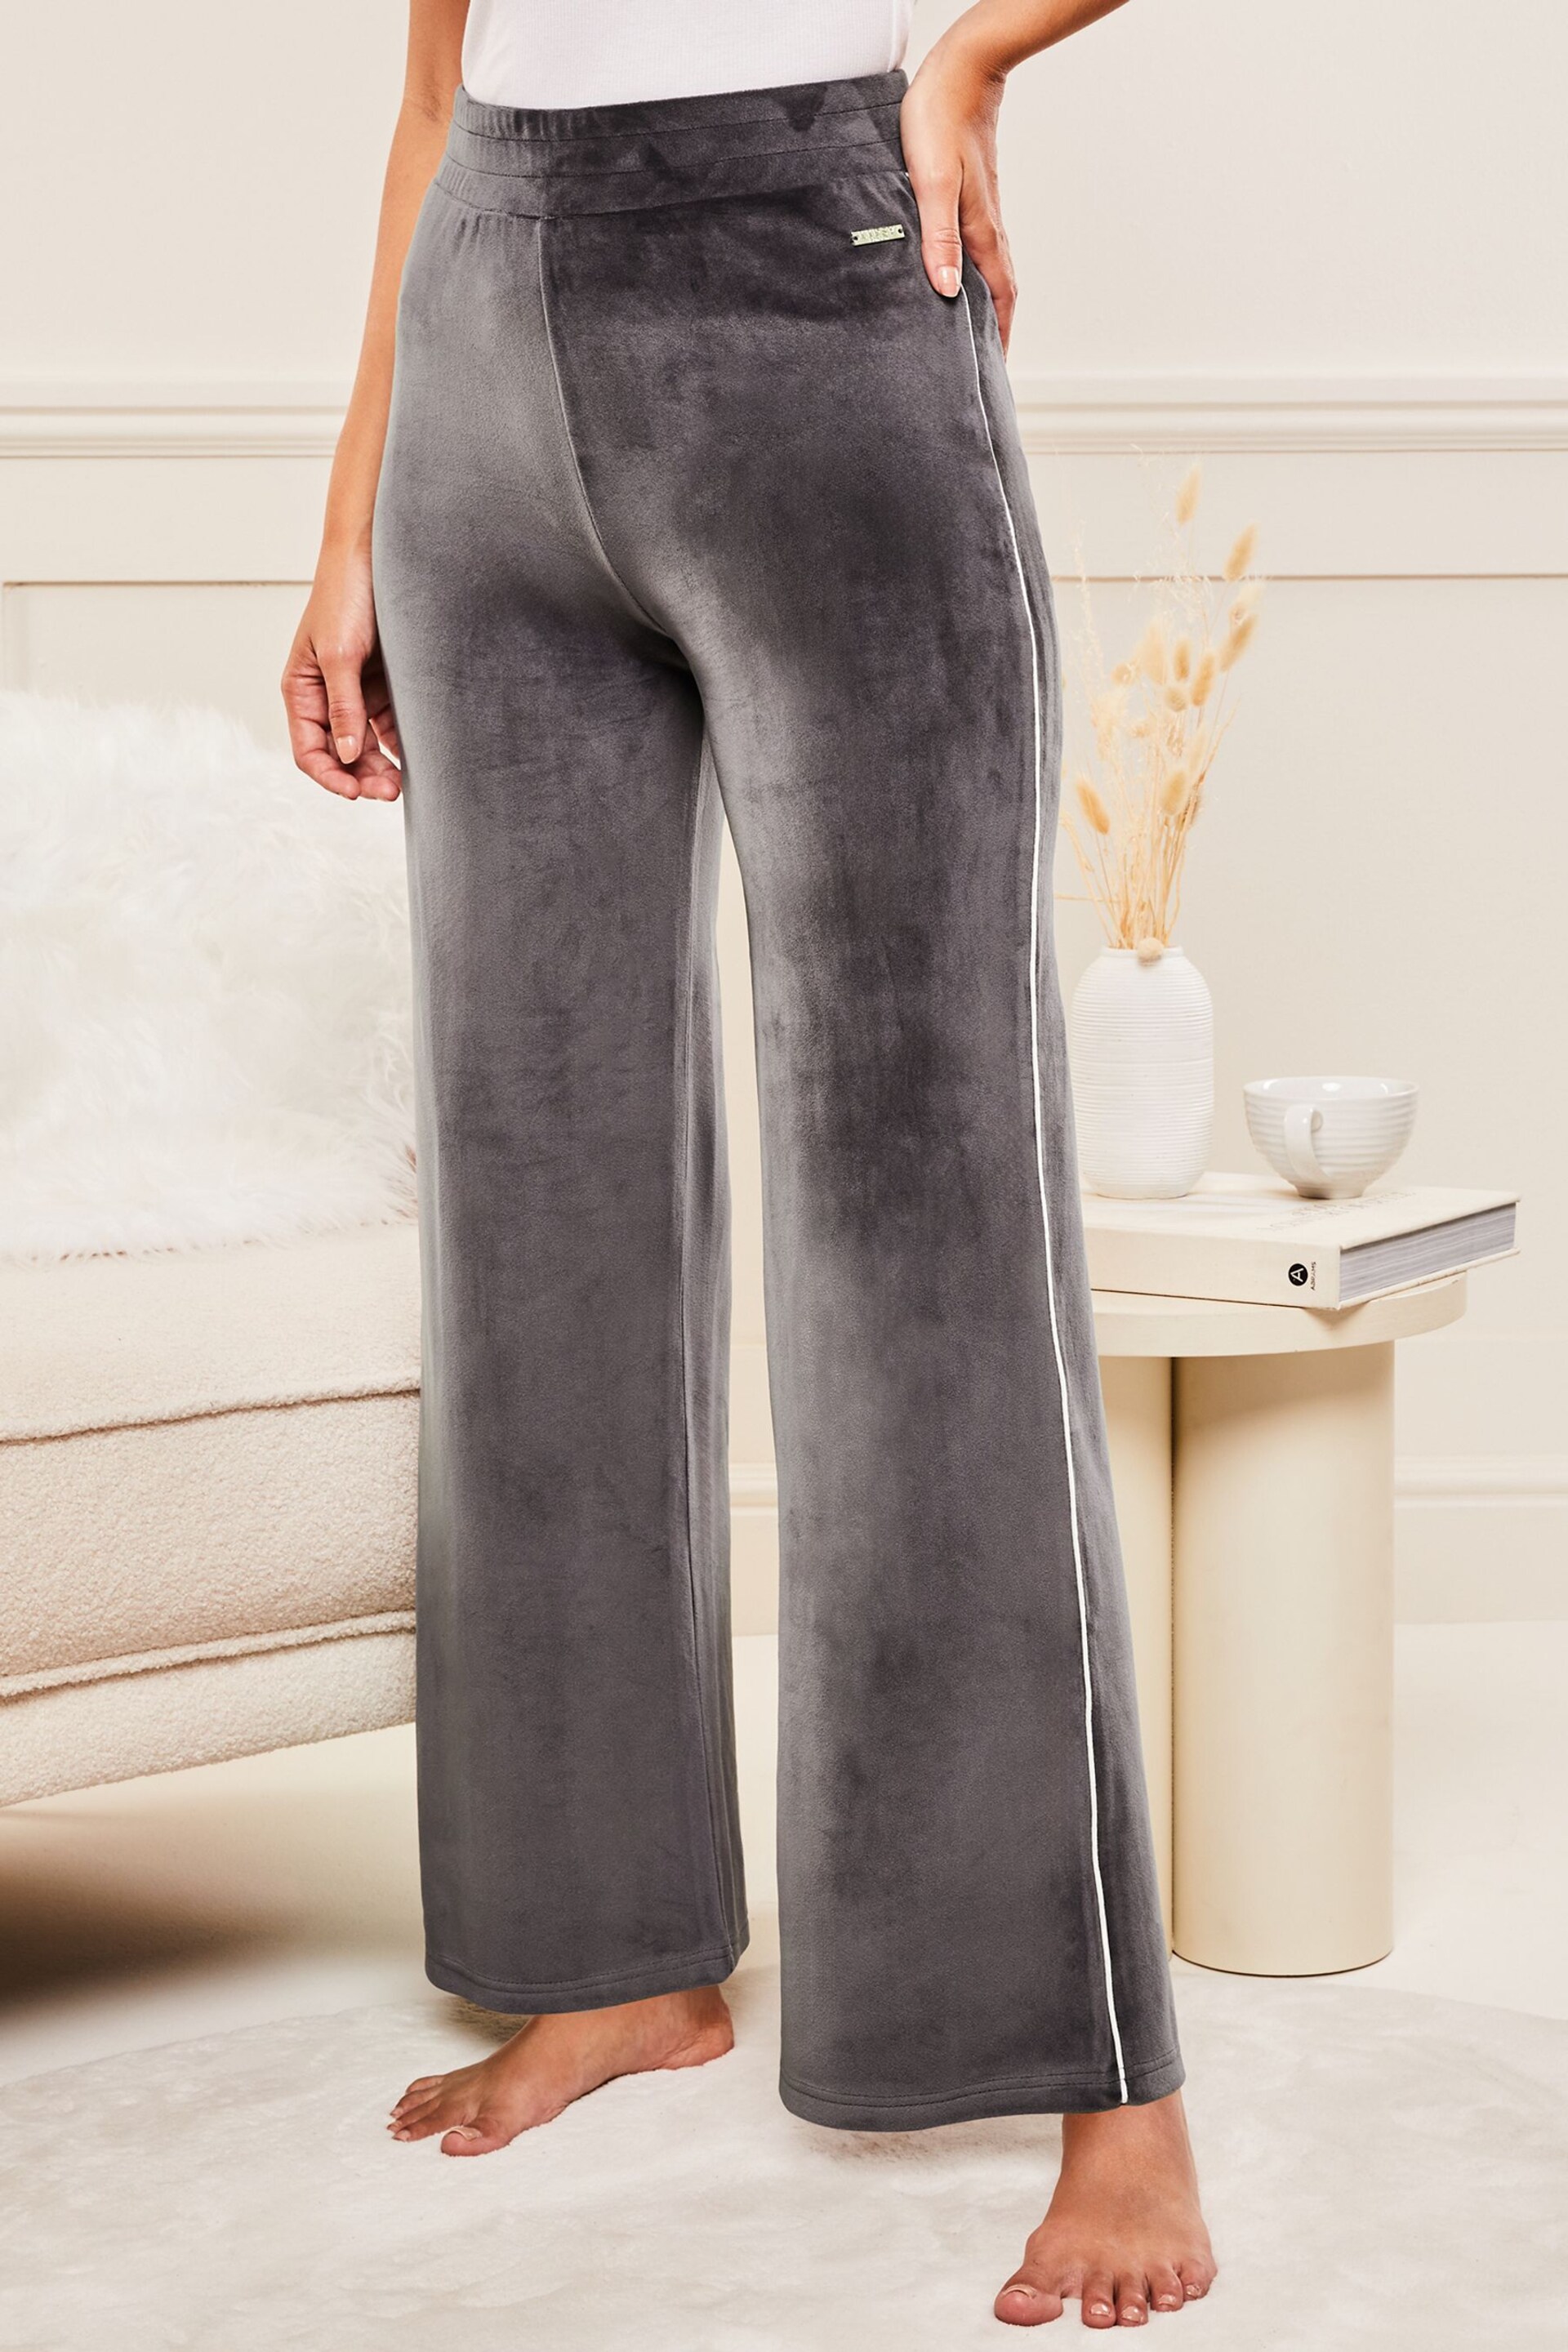 Lipsy Grey Velour Trimmed Wide Leg Trousers - Image 3 of 4